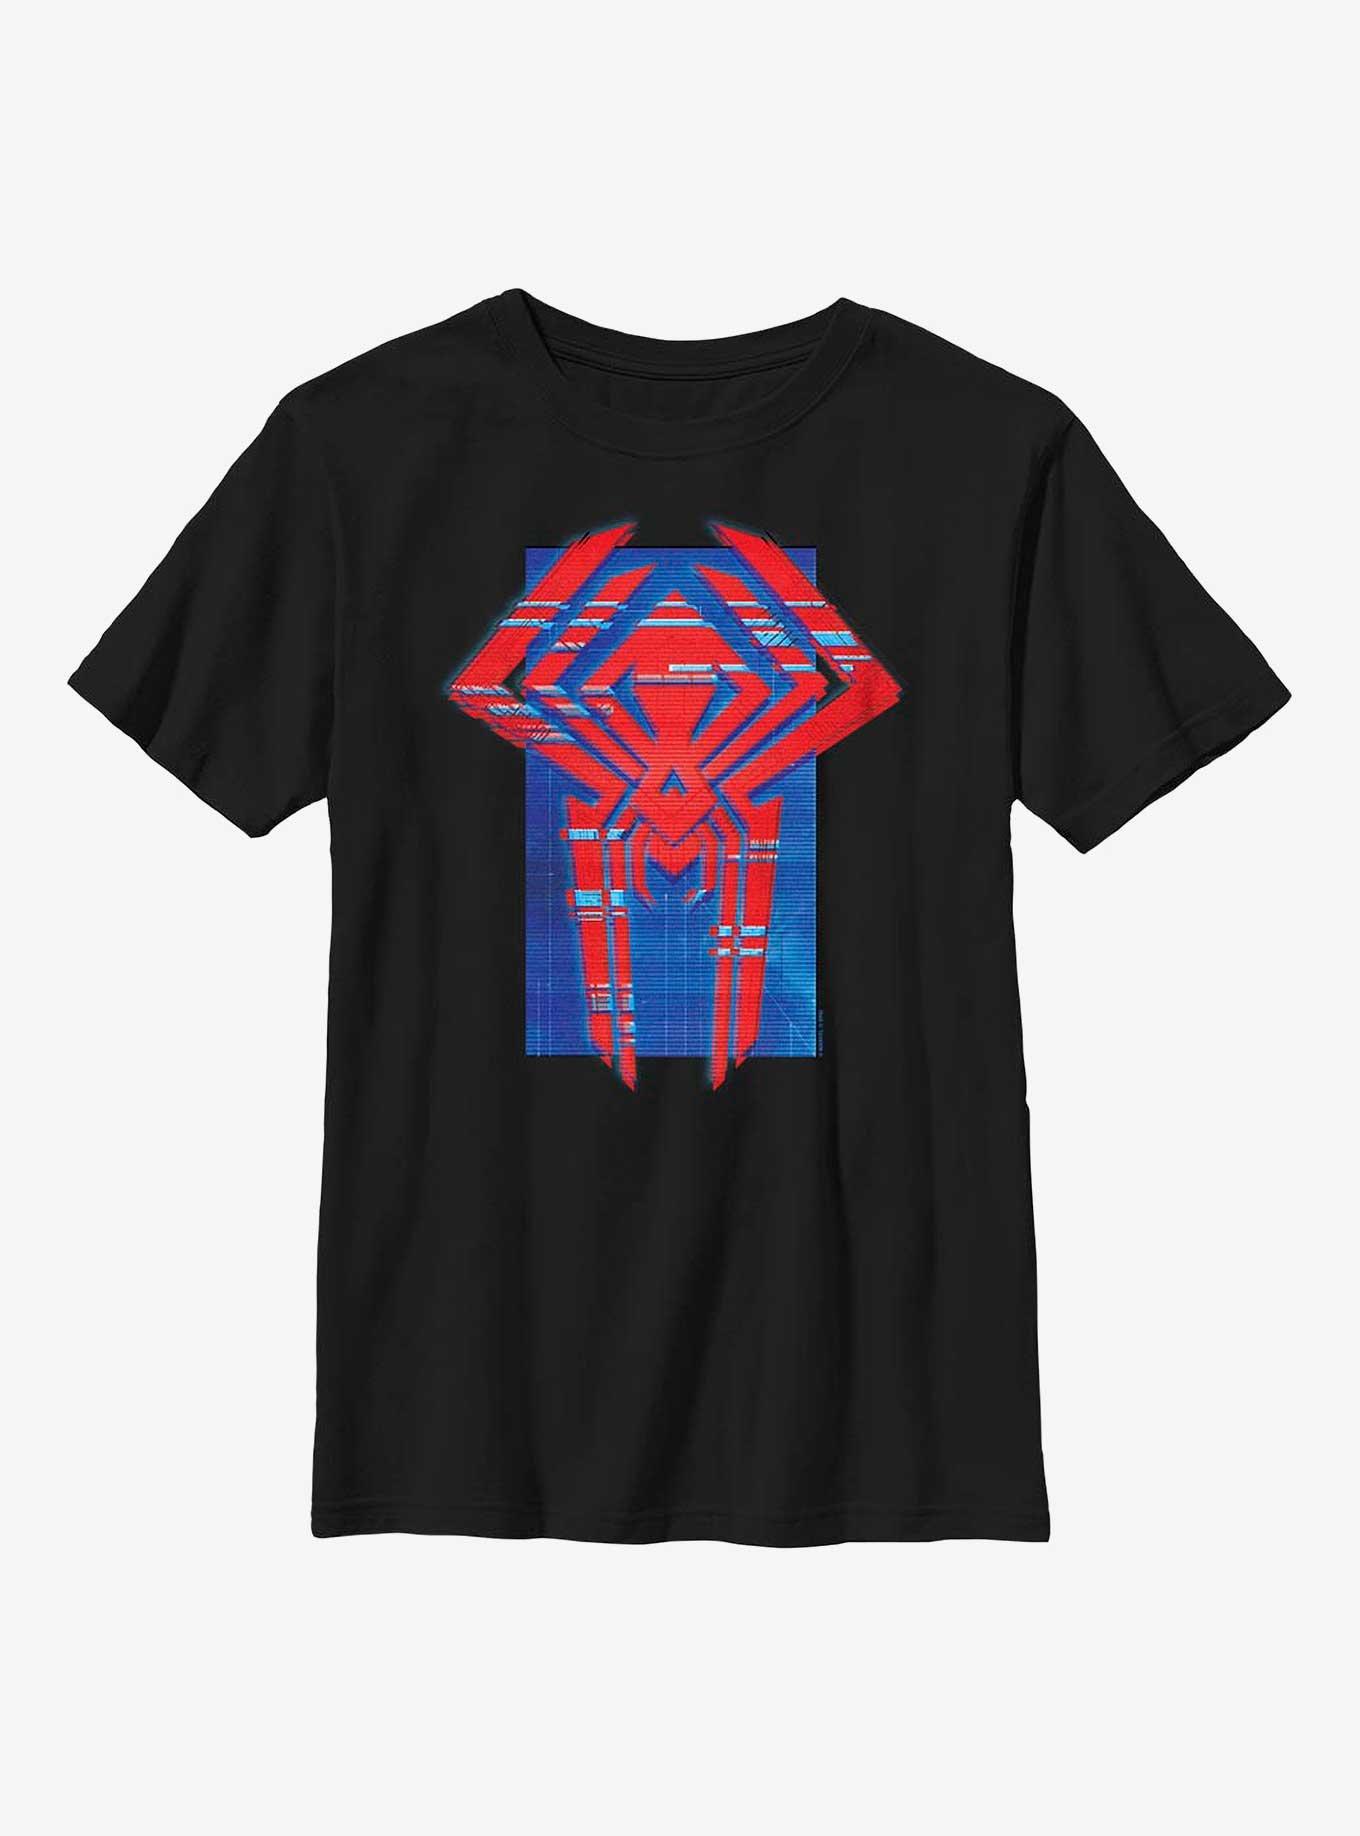 Marvel Spider-Man: Across the Spider-Verse Glitchy Miguel O'Hara Logo Youth T-Shirt, BLACK, hi-res